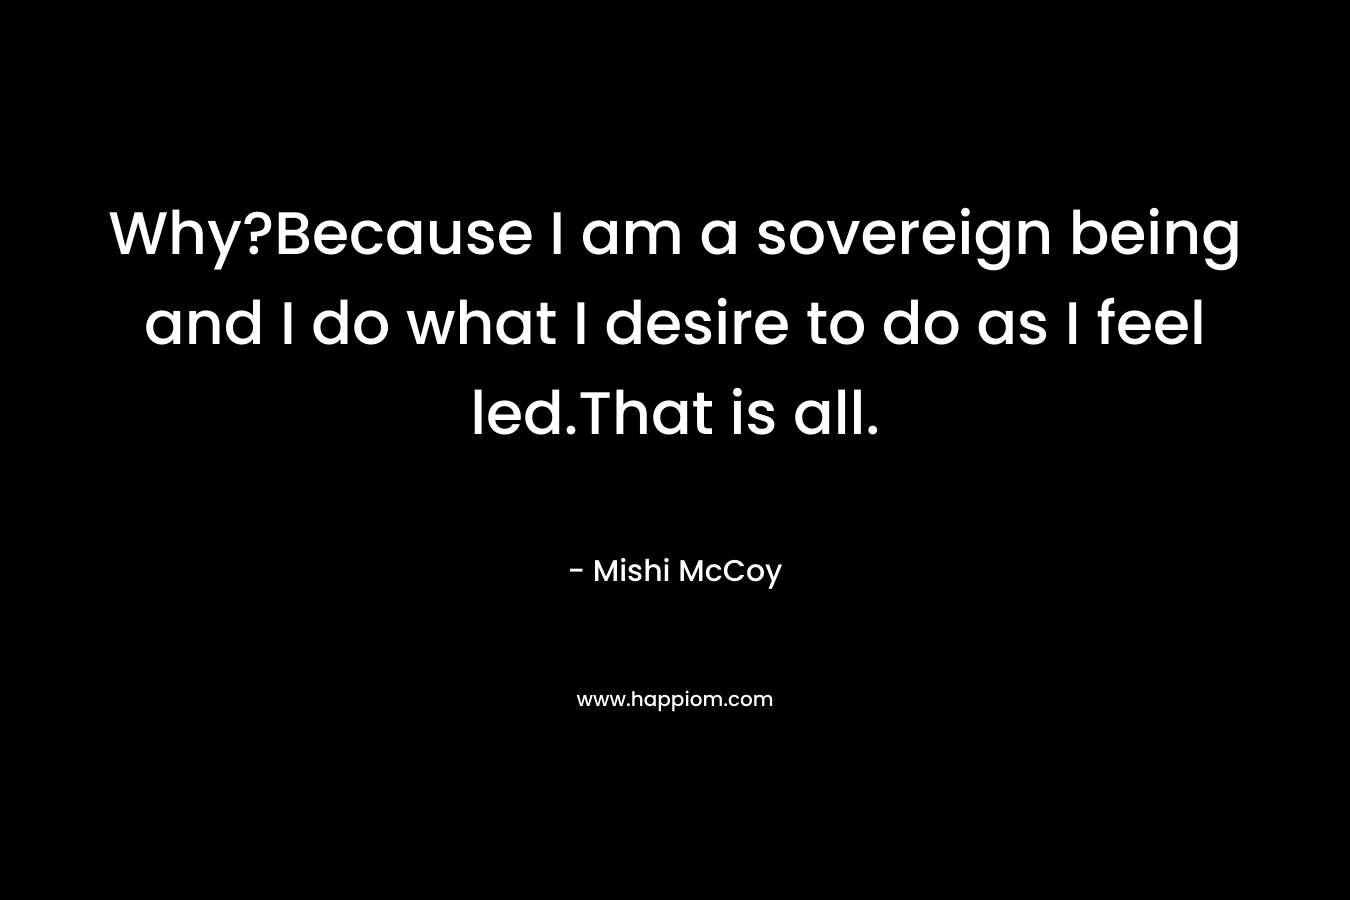 Why?Because I am a sovereign being and I do what I desire to do as I feel led.That is all. – Mishi McCoy